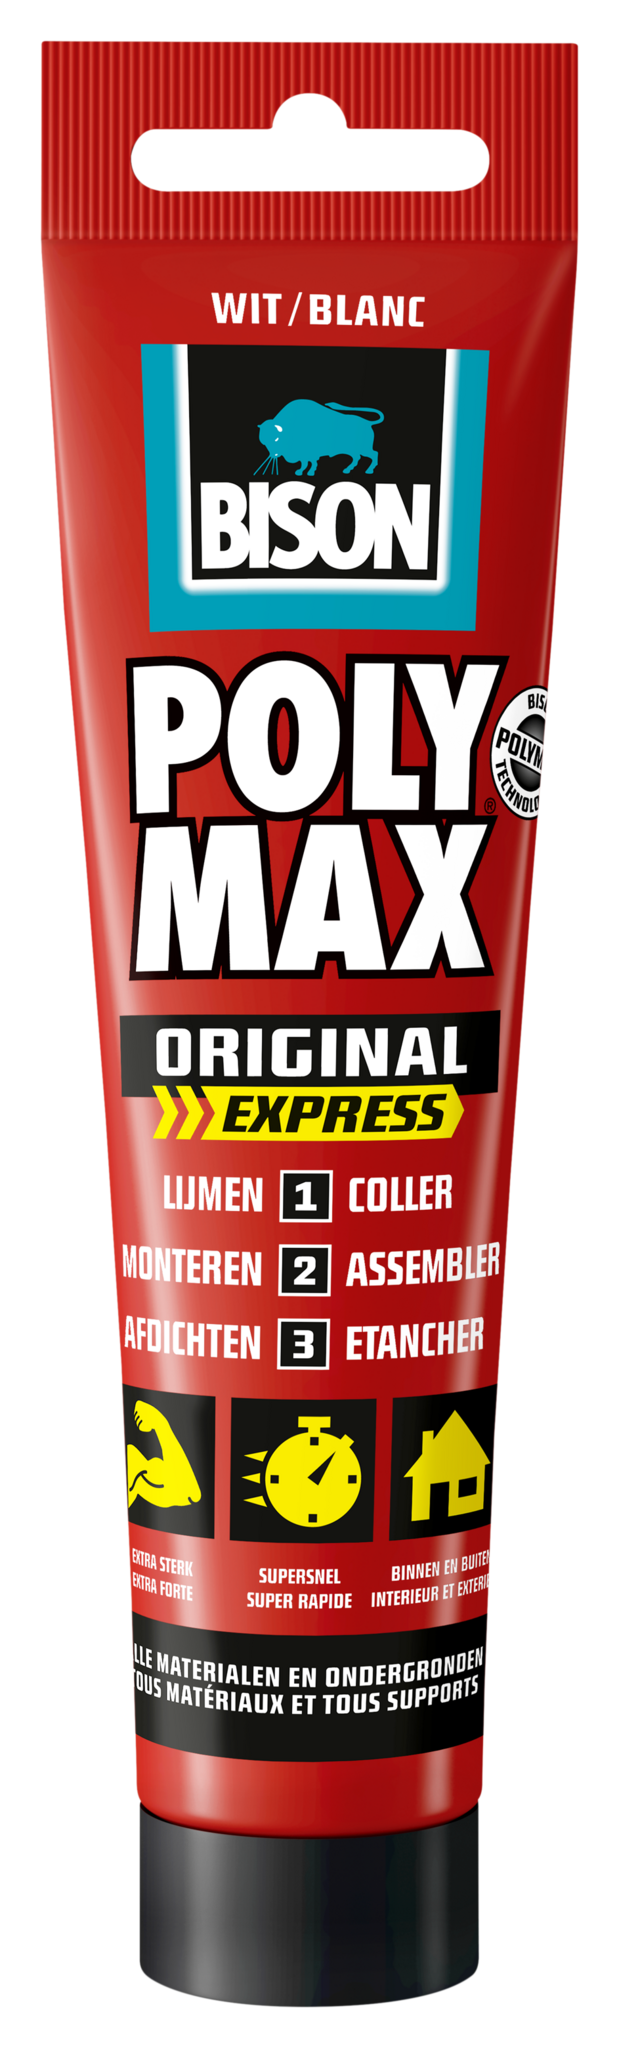 https://www.warentuin.nl/media/catalog/product/S/C/SCAN8710439226910_bison_poly_max_express_poly_max_express_wit_hangtube_165_g_bi_50fa.png